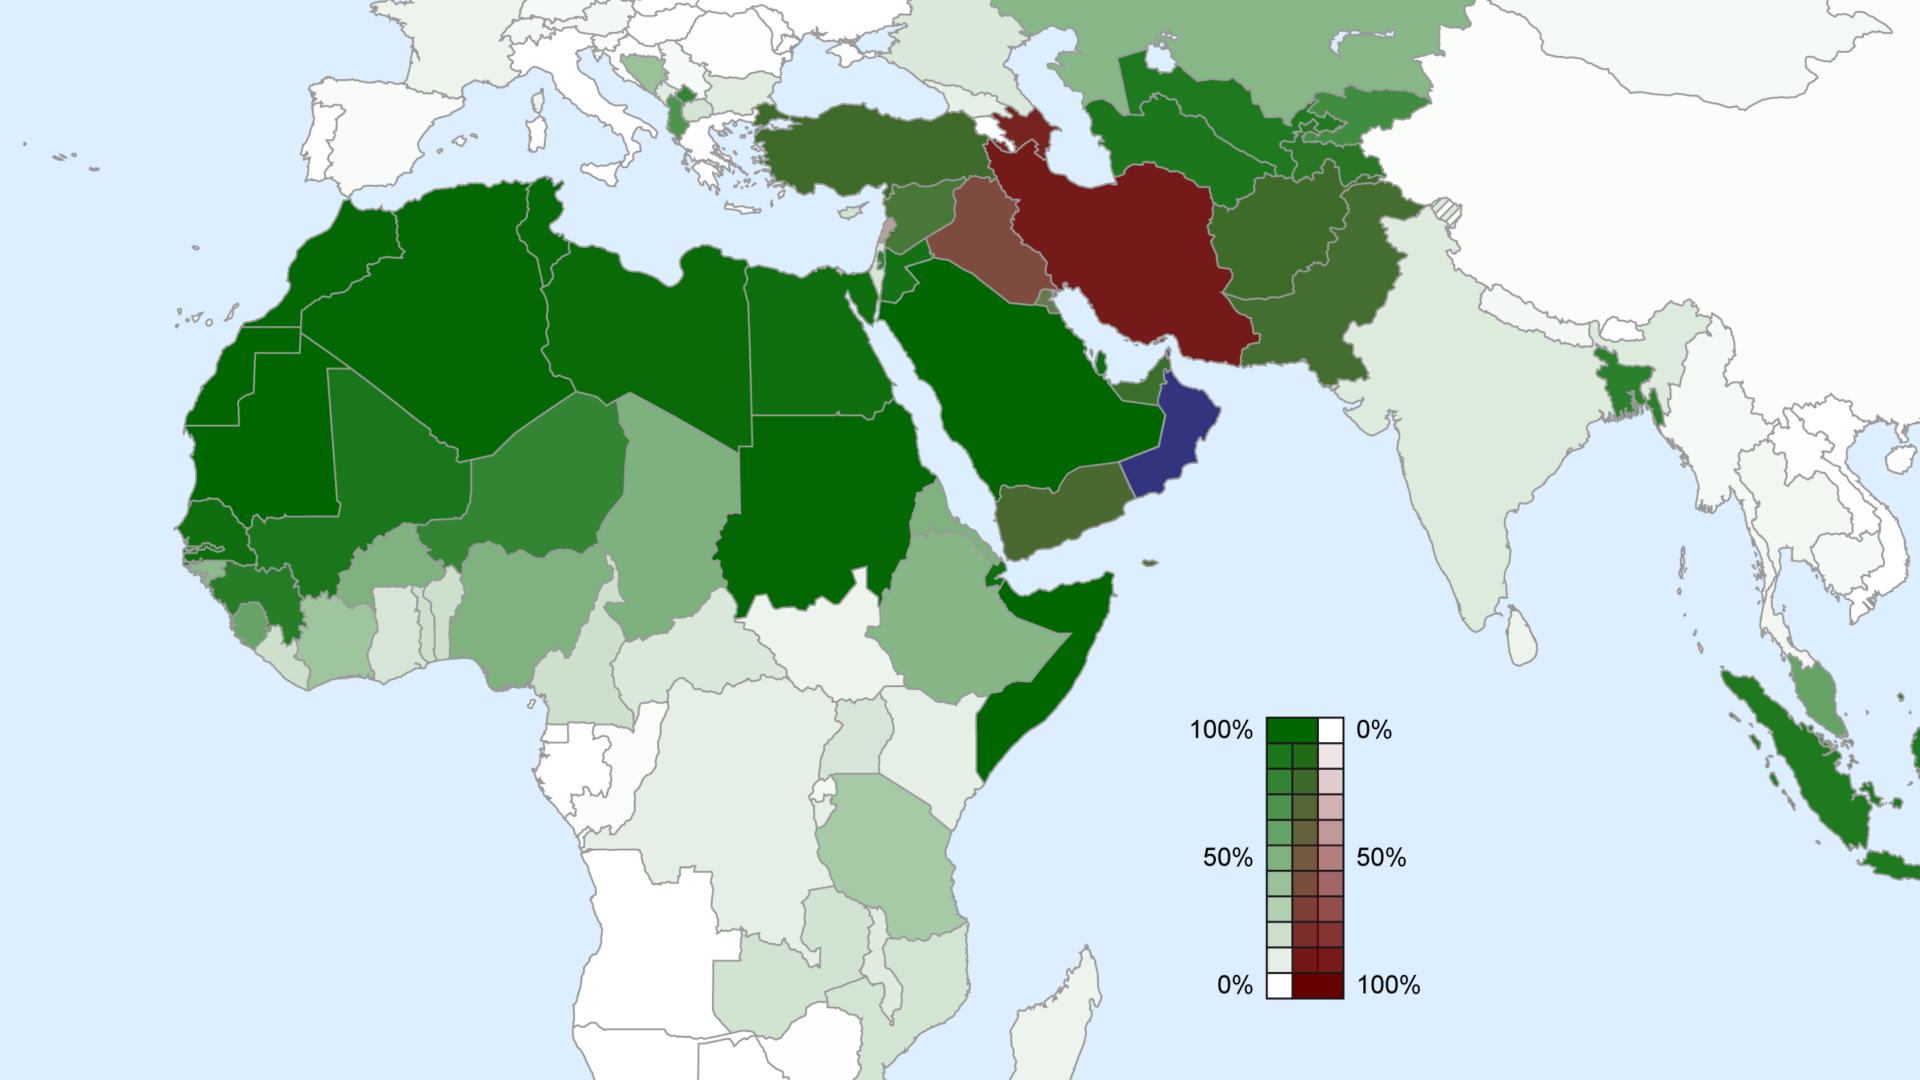 Islam by country (2015)